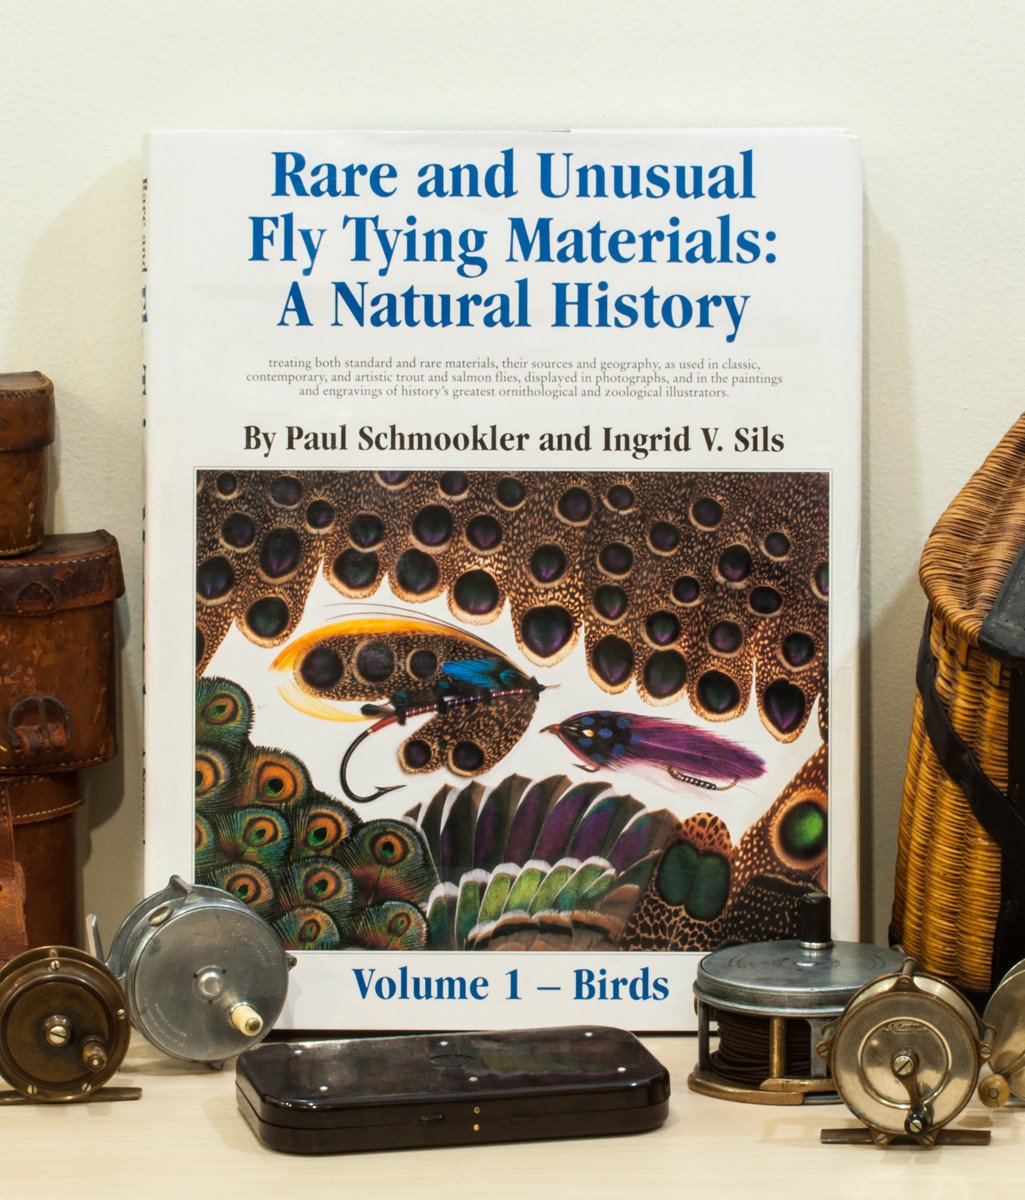 Schmookler & Sils - Rare And Unusual Fly Tying Materials: A Natural History  - Volume 1